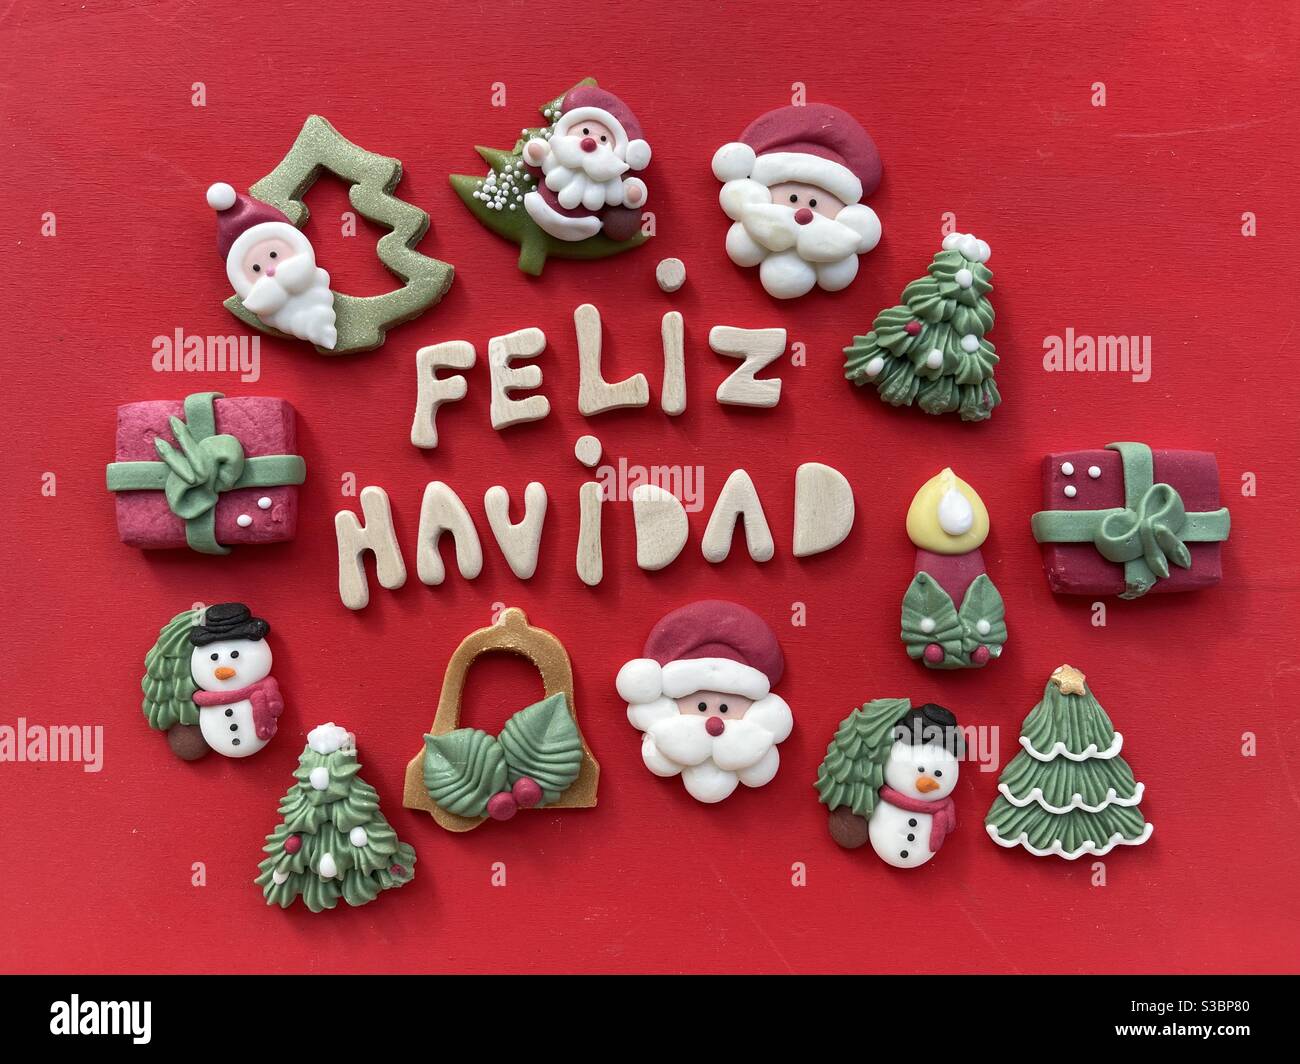 Feliz Navidad, Merry Christmas in spanish language with wooden letters and marzipan Christmas symbols Stock Photo